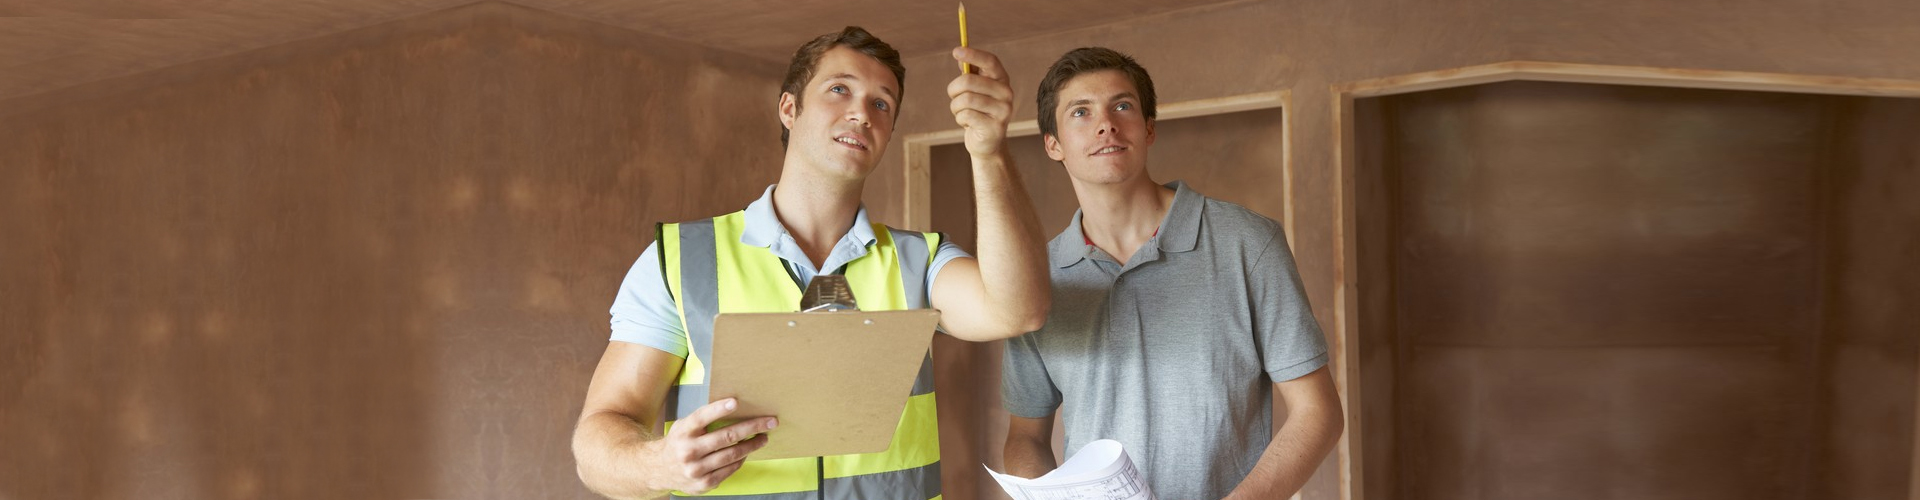 professional construction worker discussing with an adult man smiling